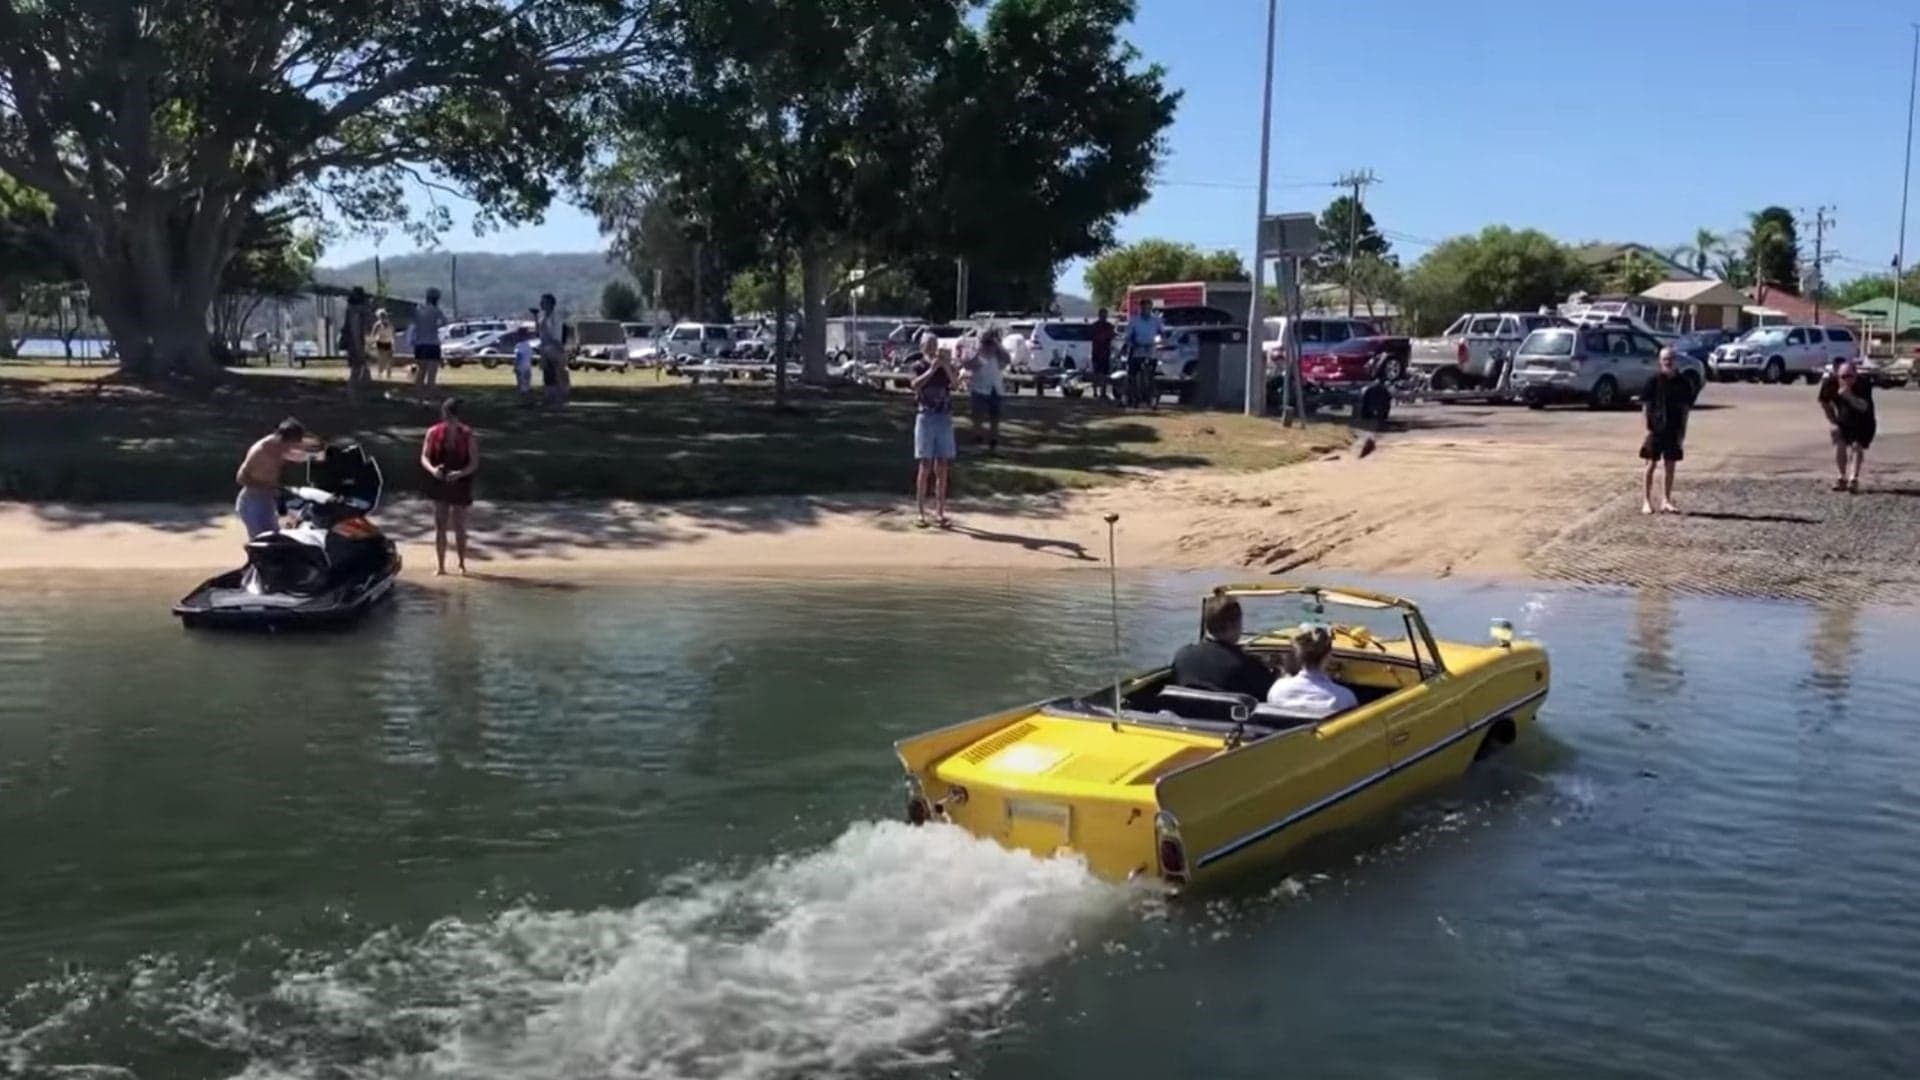 Who Needs a Boat When You Could Have an Amphicar?